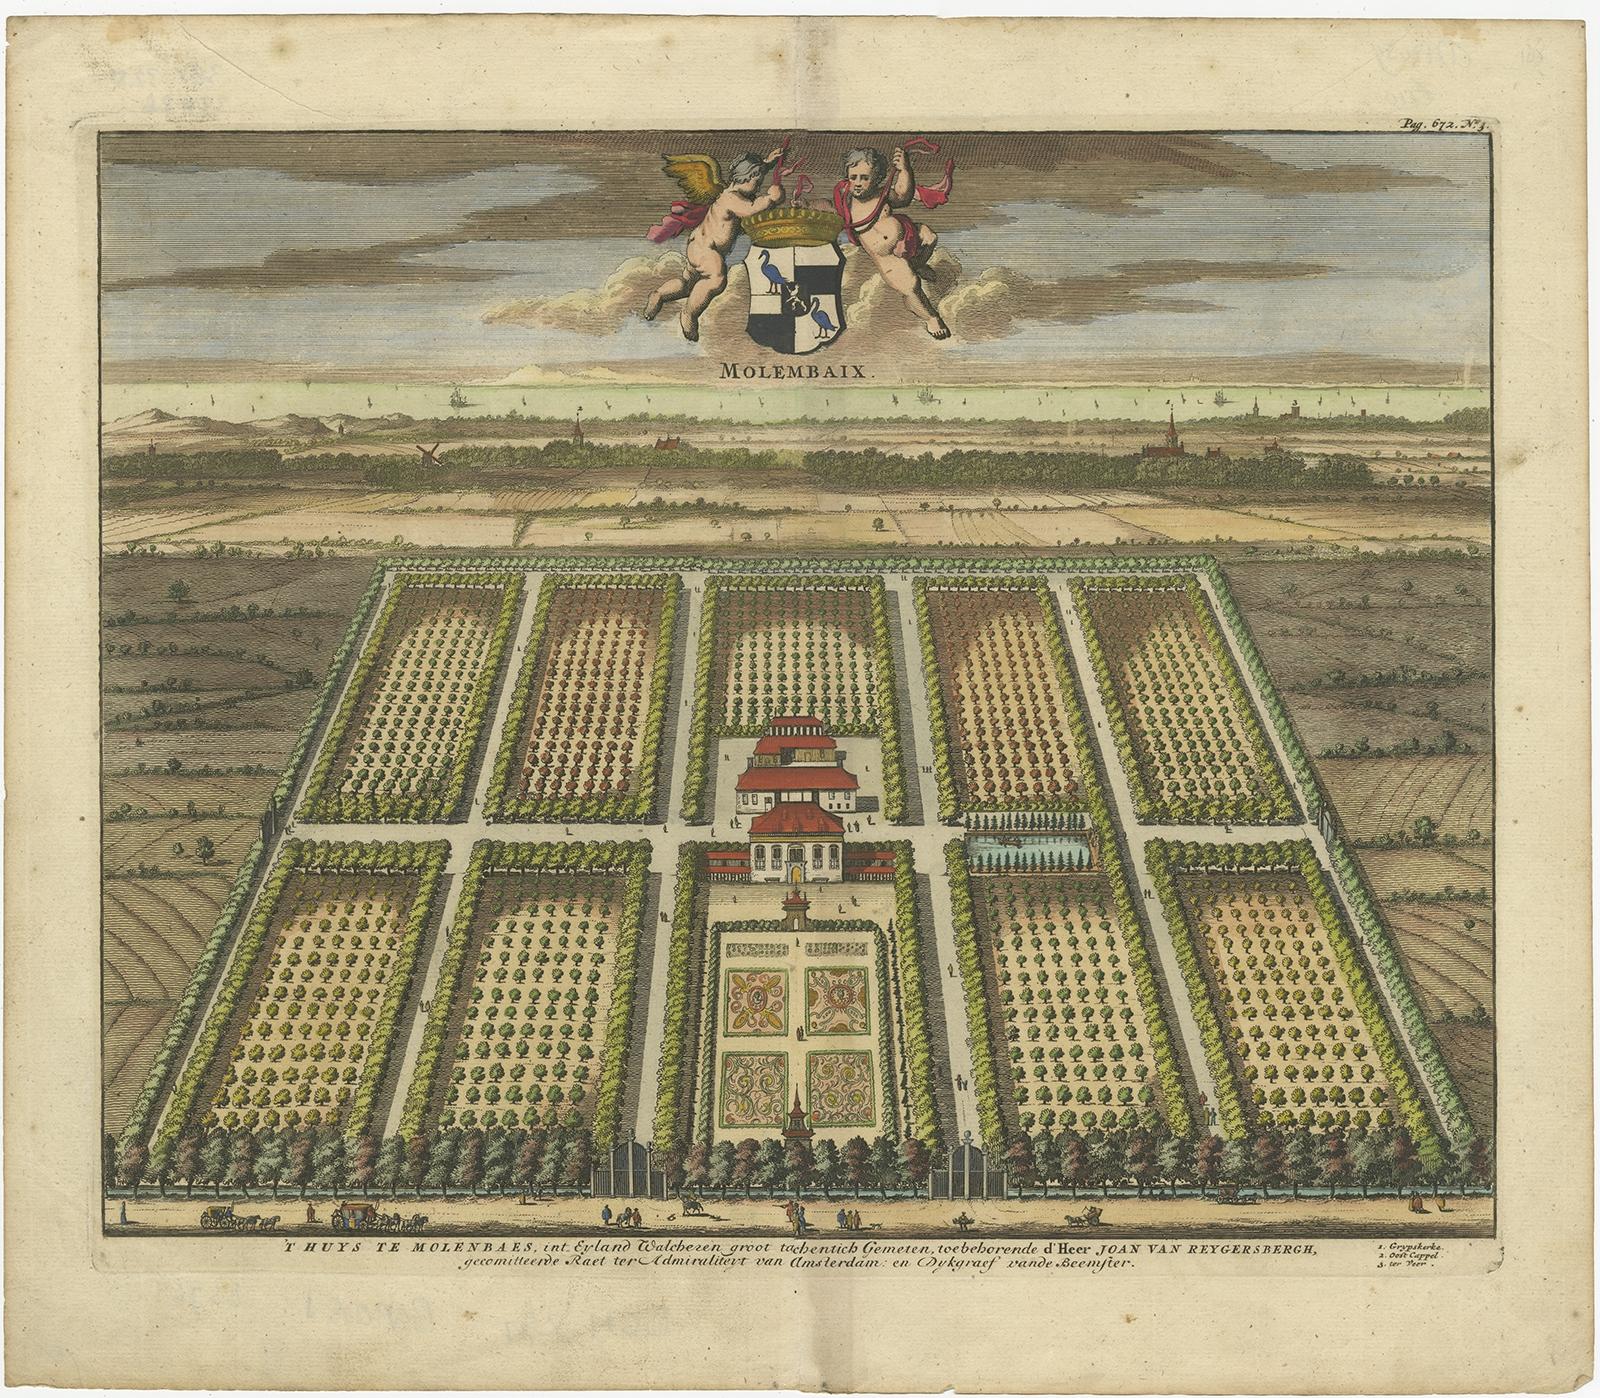 Paper Old Decorative Handcolored Engraving of the Molenbaix Estate in Belgium, 1696 For Sale